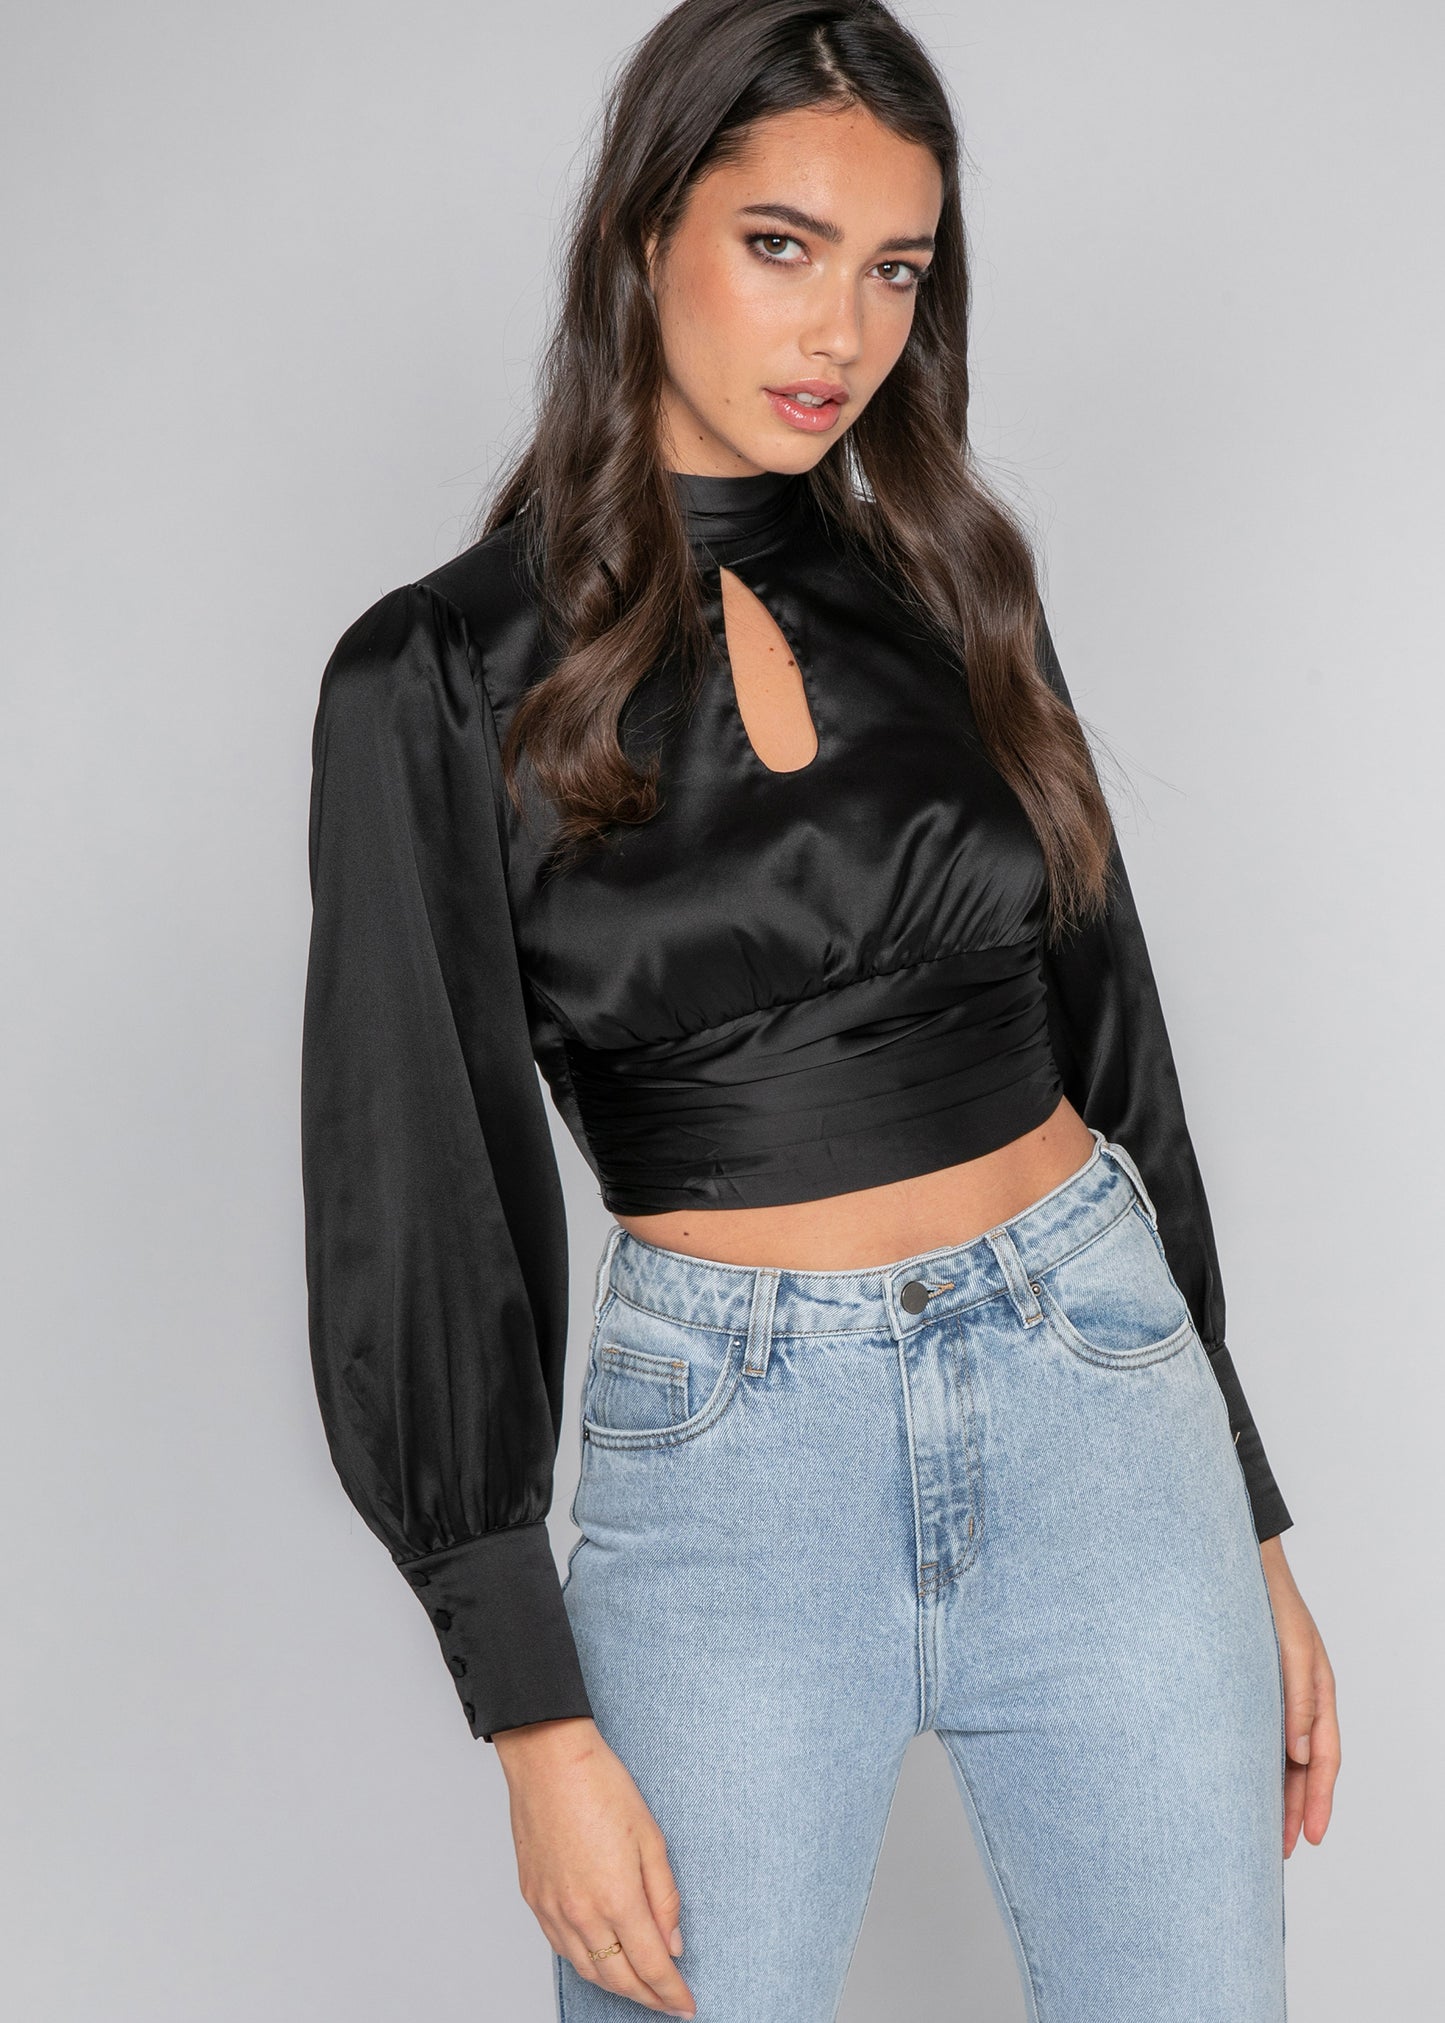 Satin backless high neck top in black